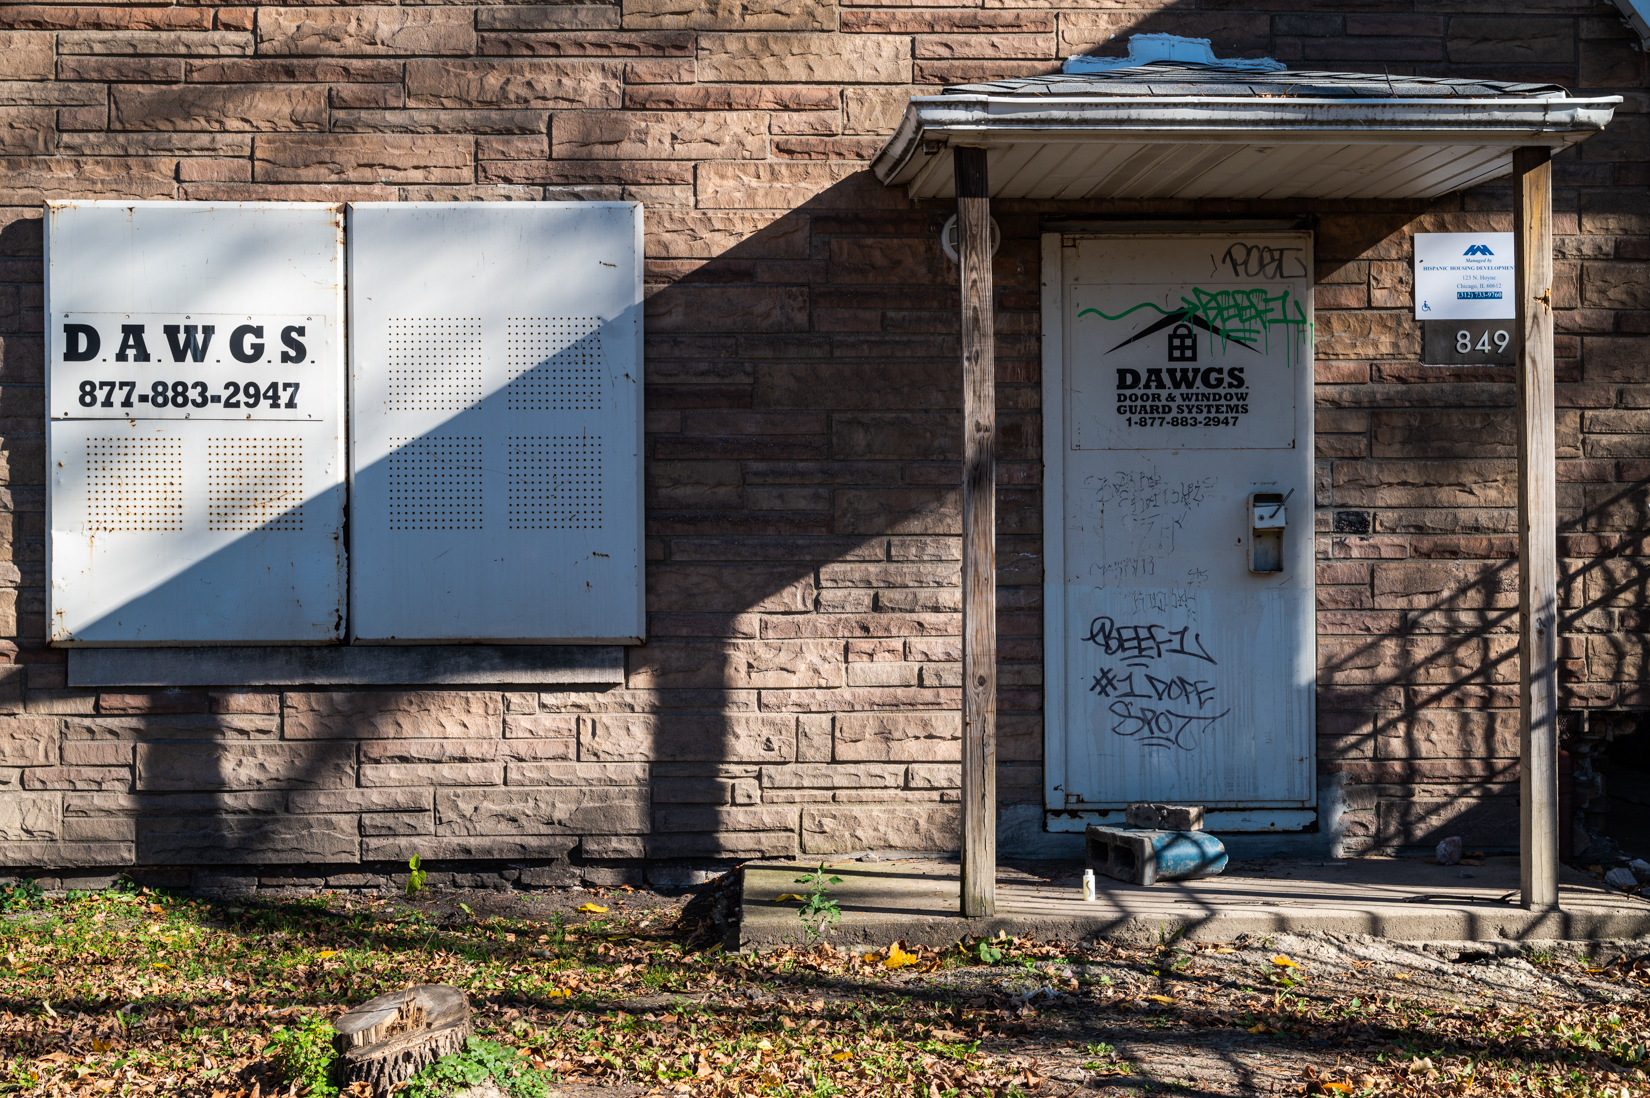 Neighbors have called 911 dozens of times to report drug sales and other criminal activity at this West Humboldt Park home owned by the Chicago Housing Authority. Credit: Colin Boyle/Block Club Chicago